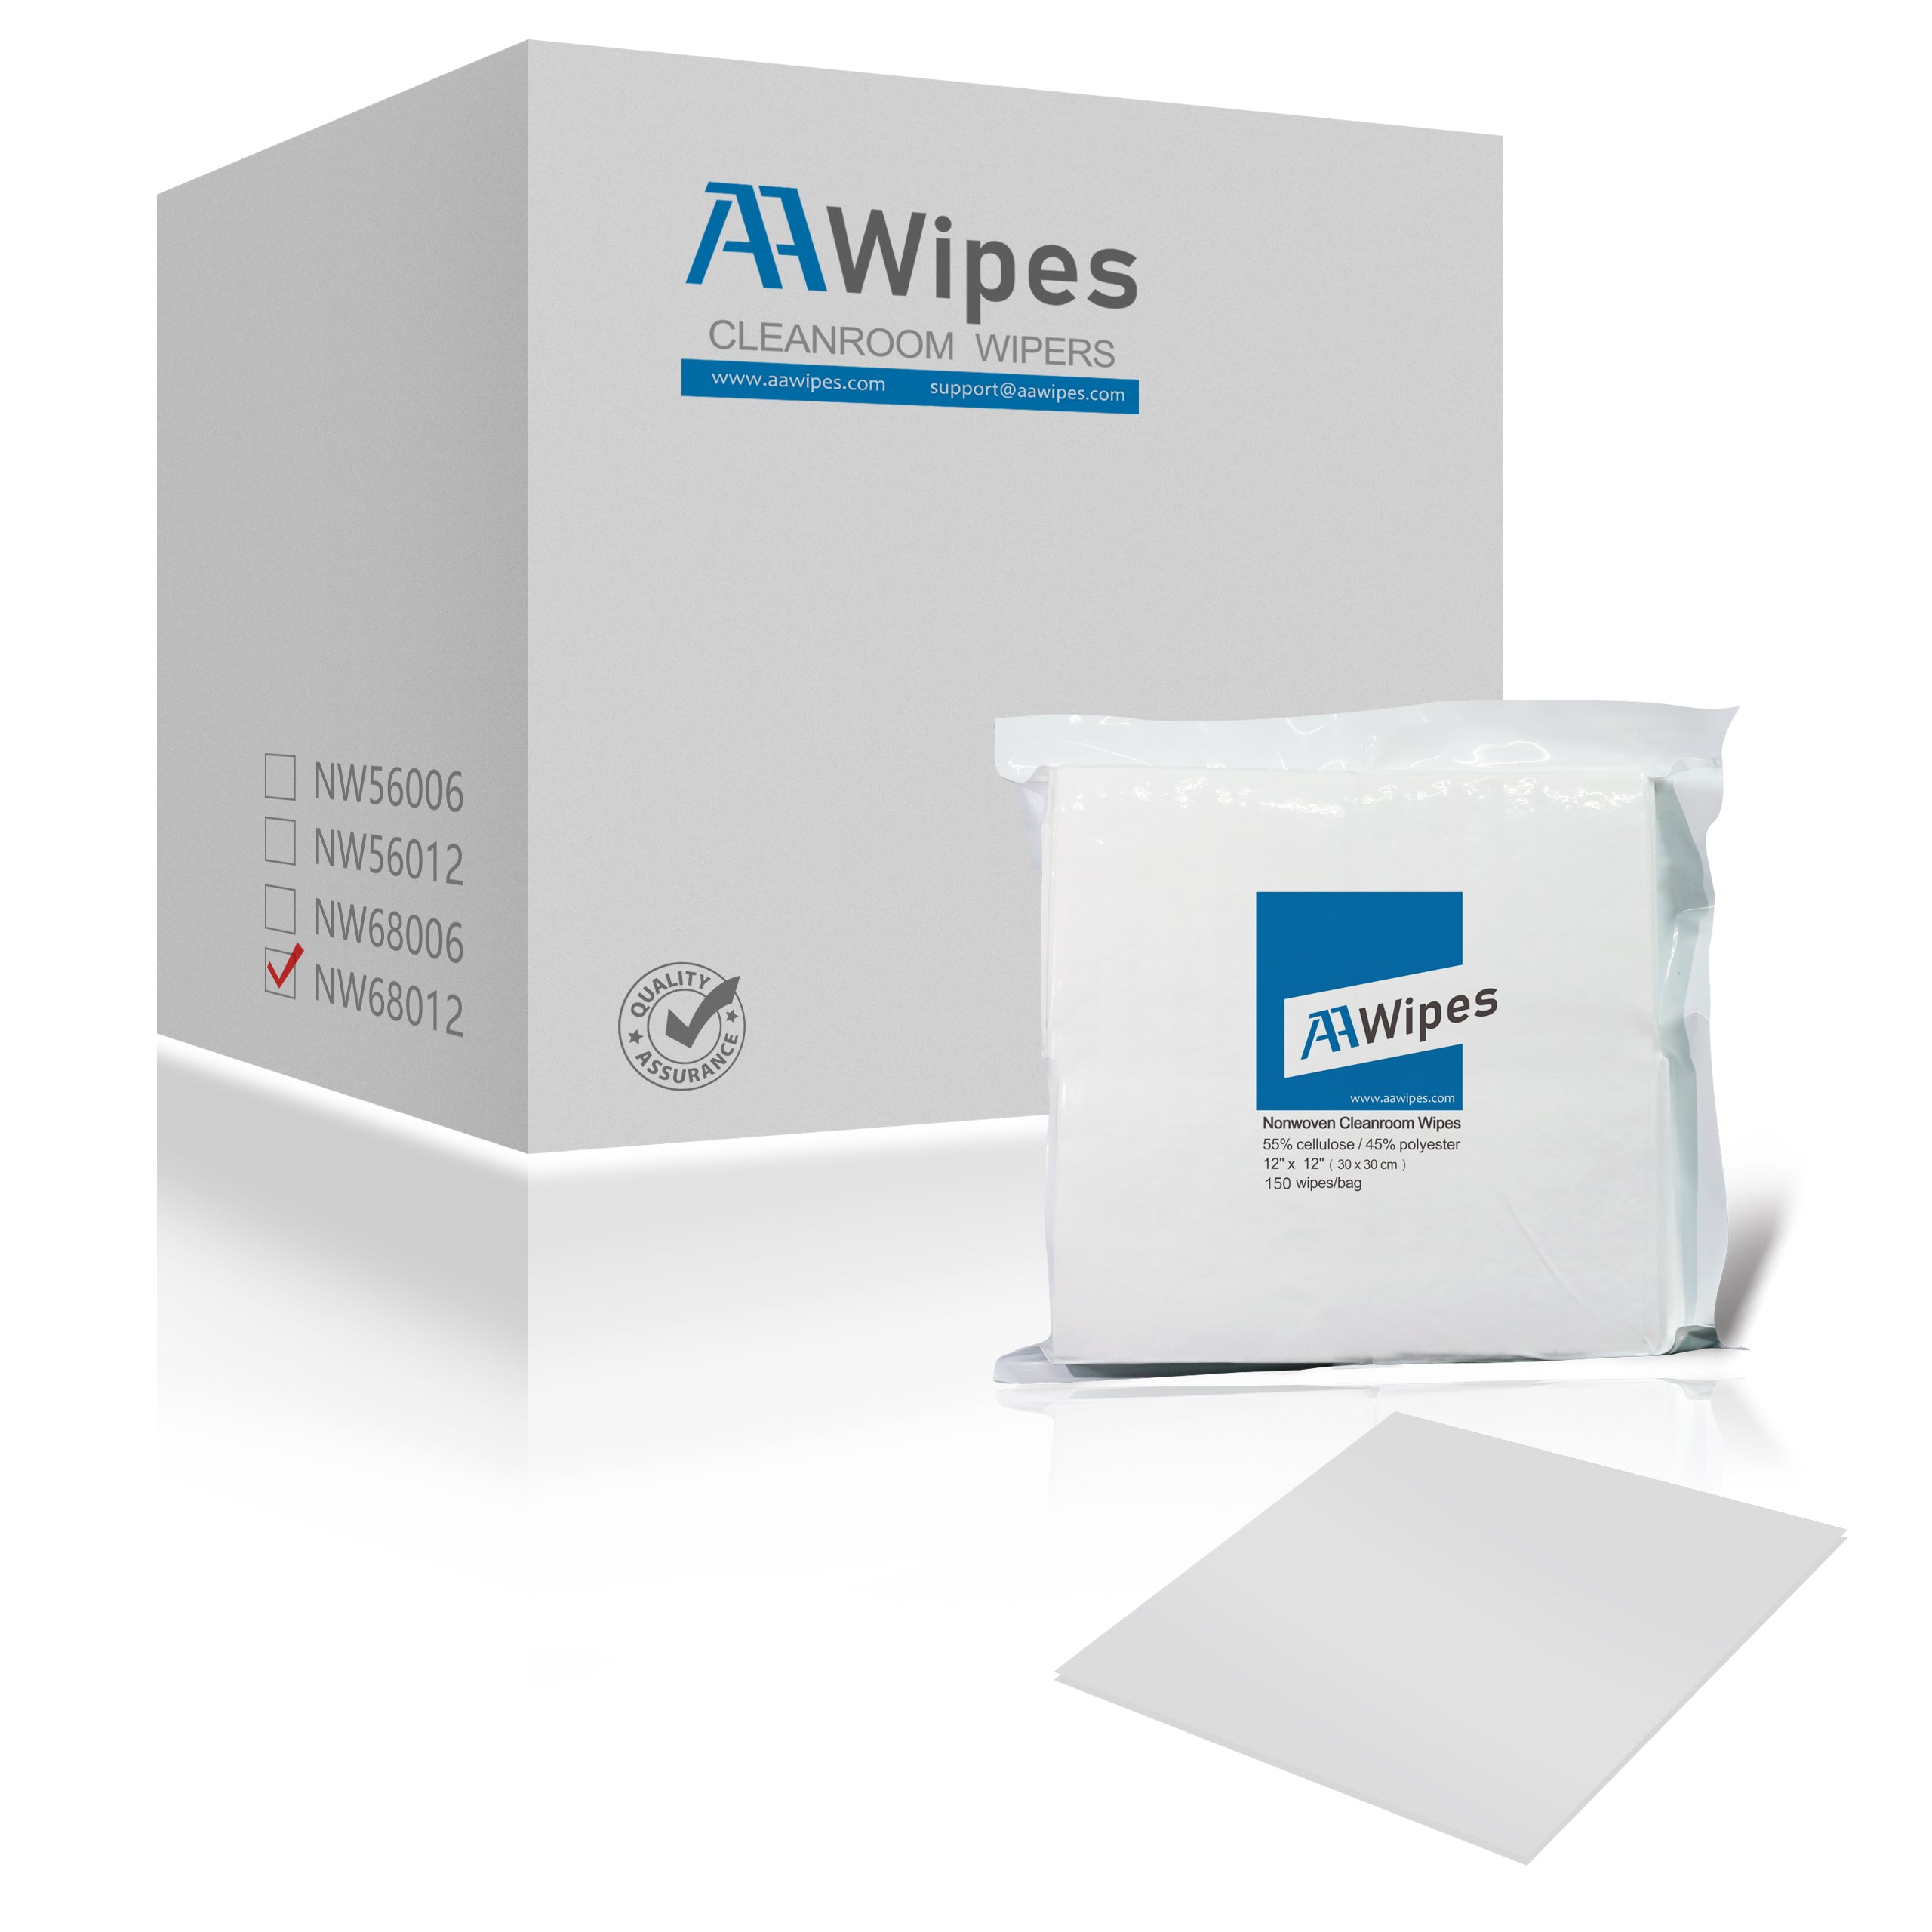 Material: Fabricated from a hydro-entangled, nonwoven blend of 55% cellulose and 45% polyester, Grade A, 68 GSM. This blend provides high absorbency of natural fibers along with the cleanliness and strength of synthetic wipers.